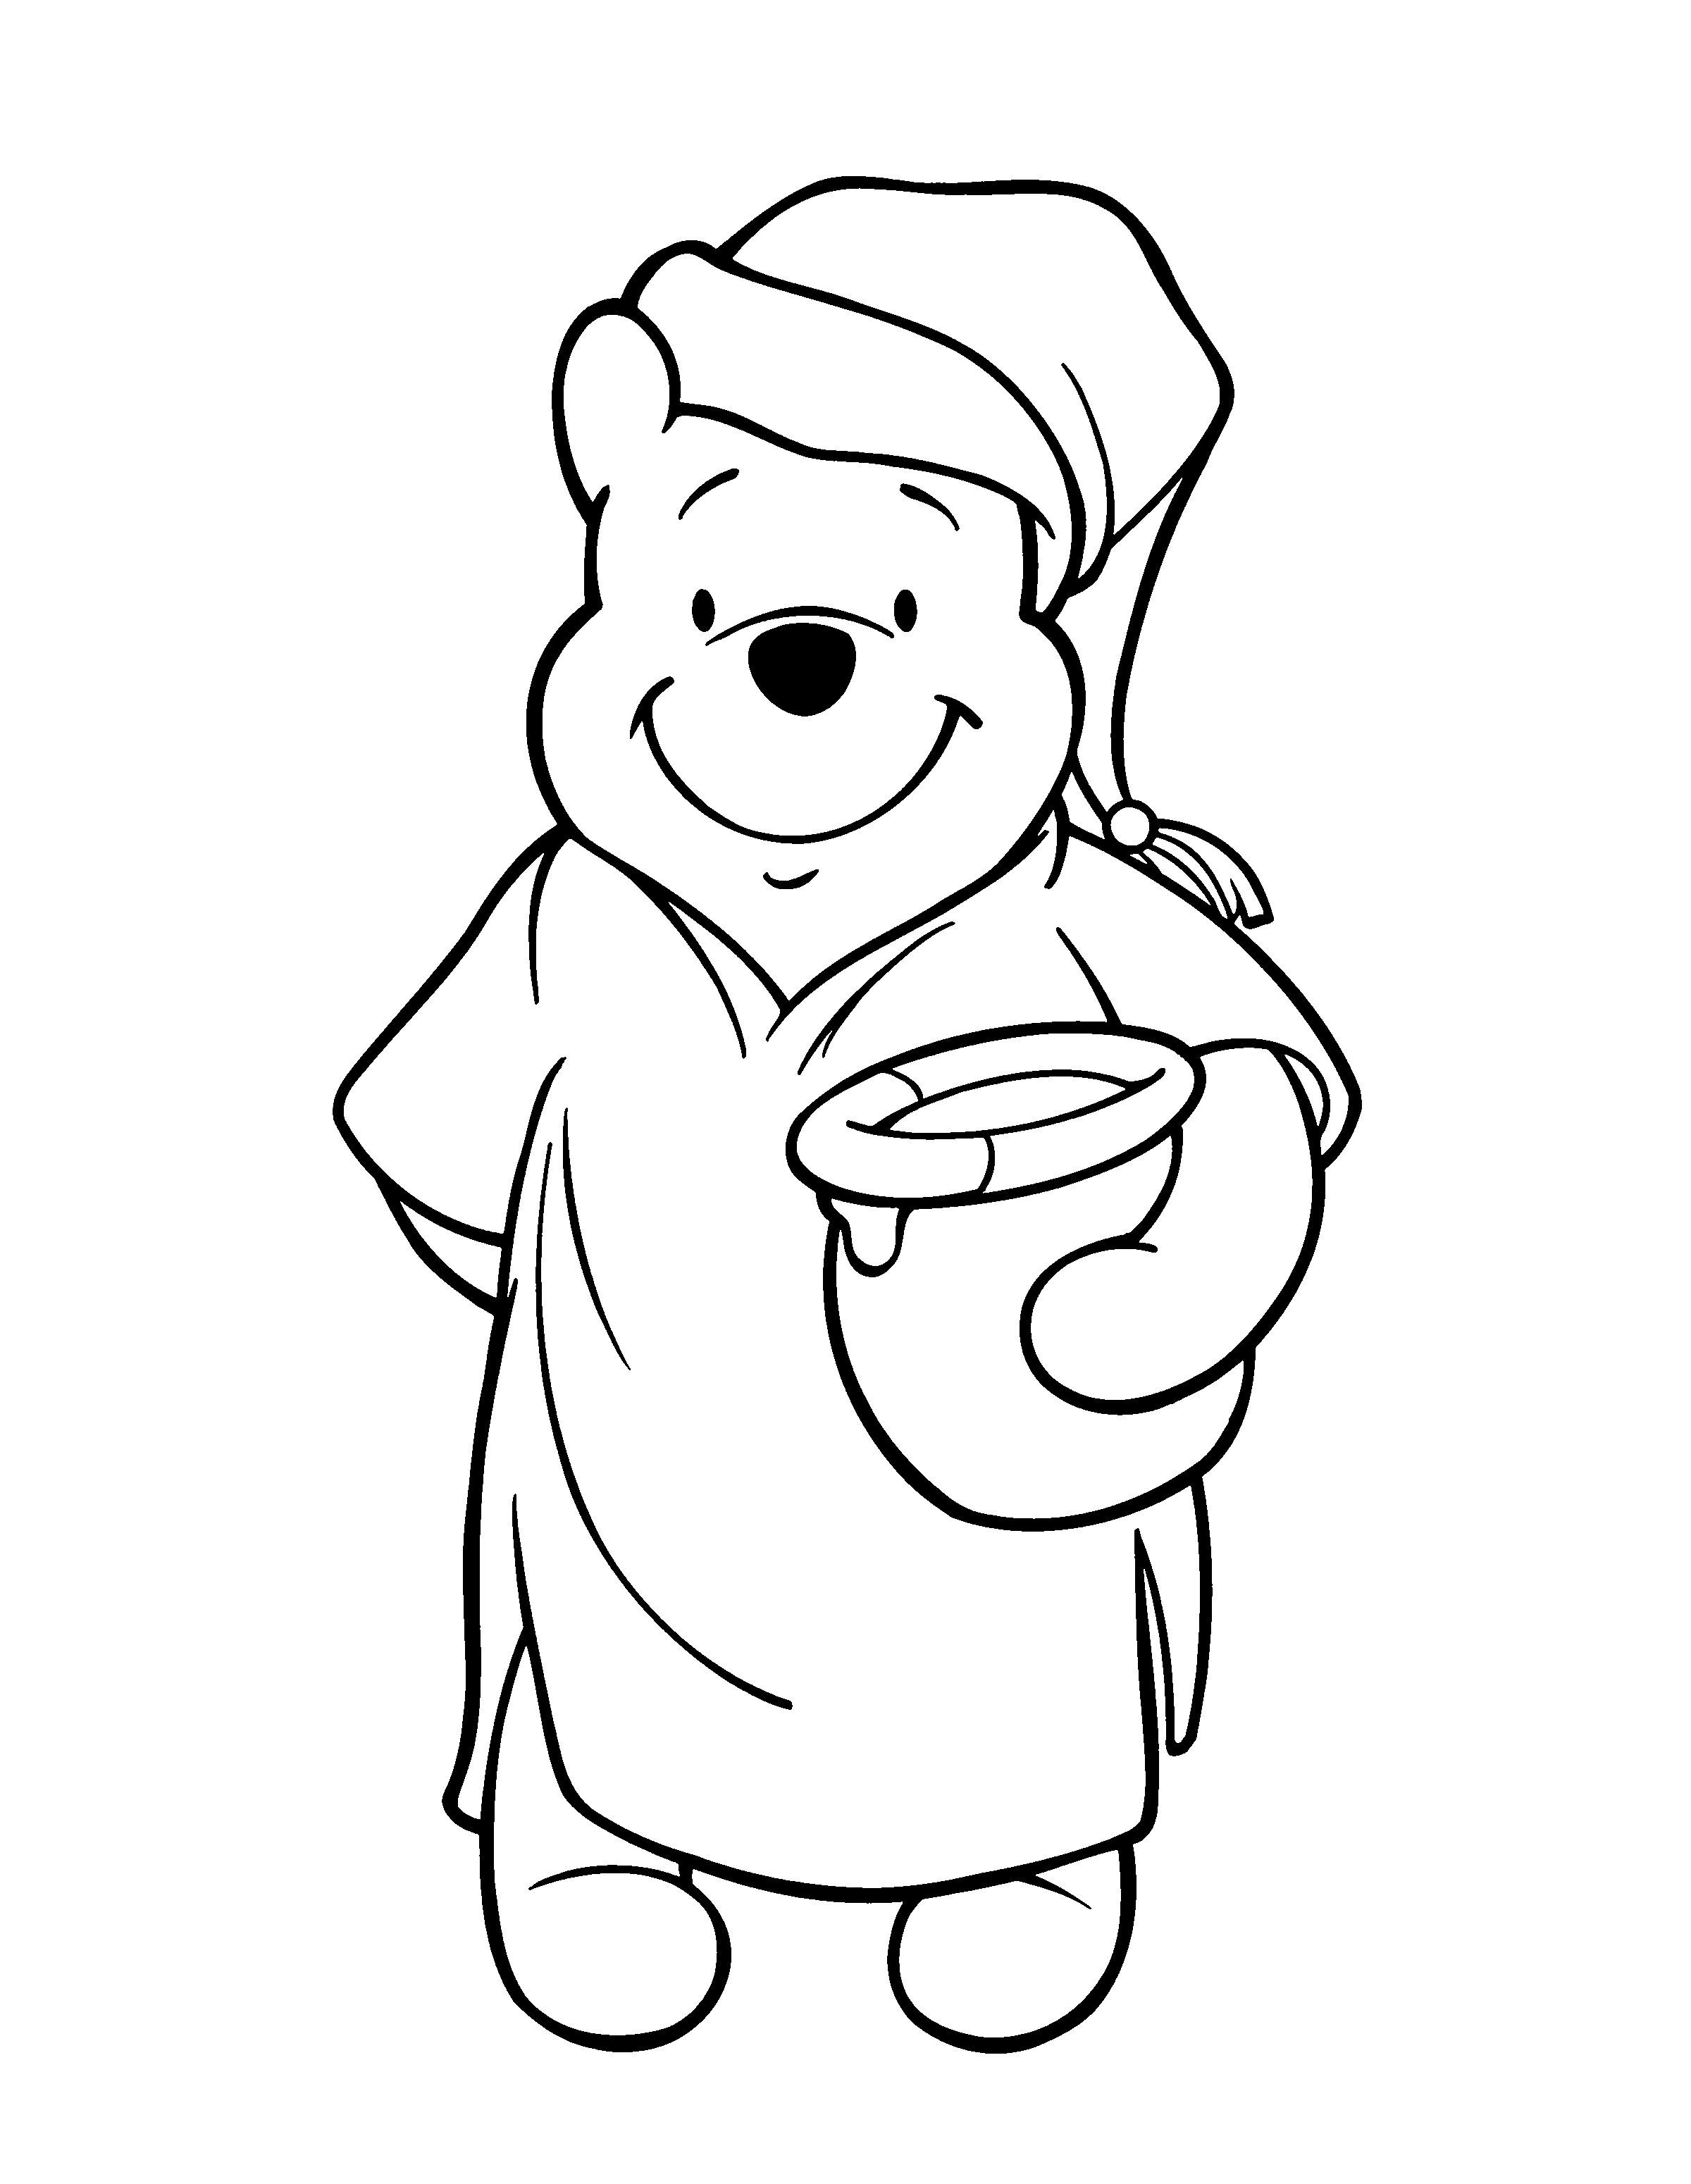 Winnie the pooh coloring pages